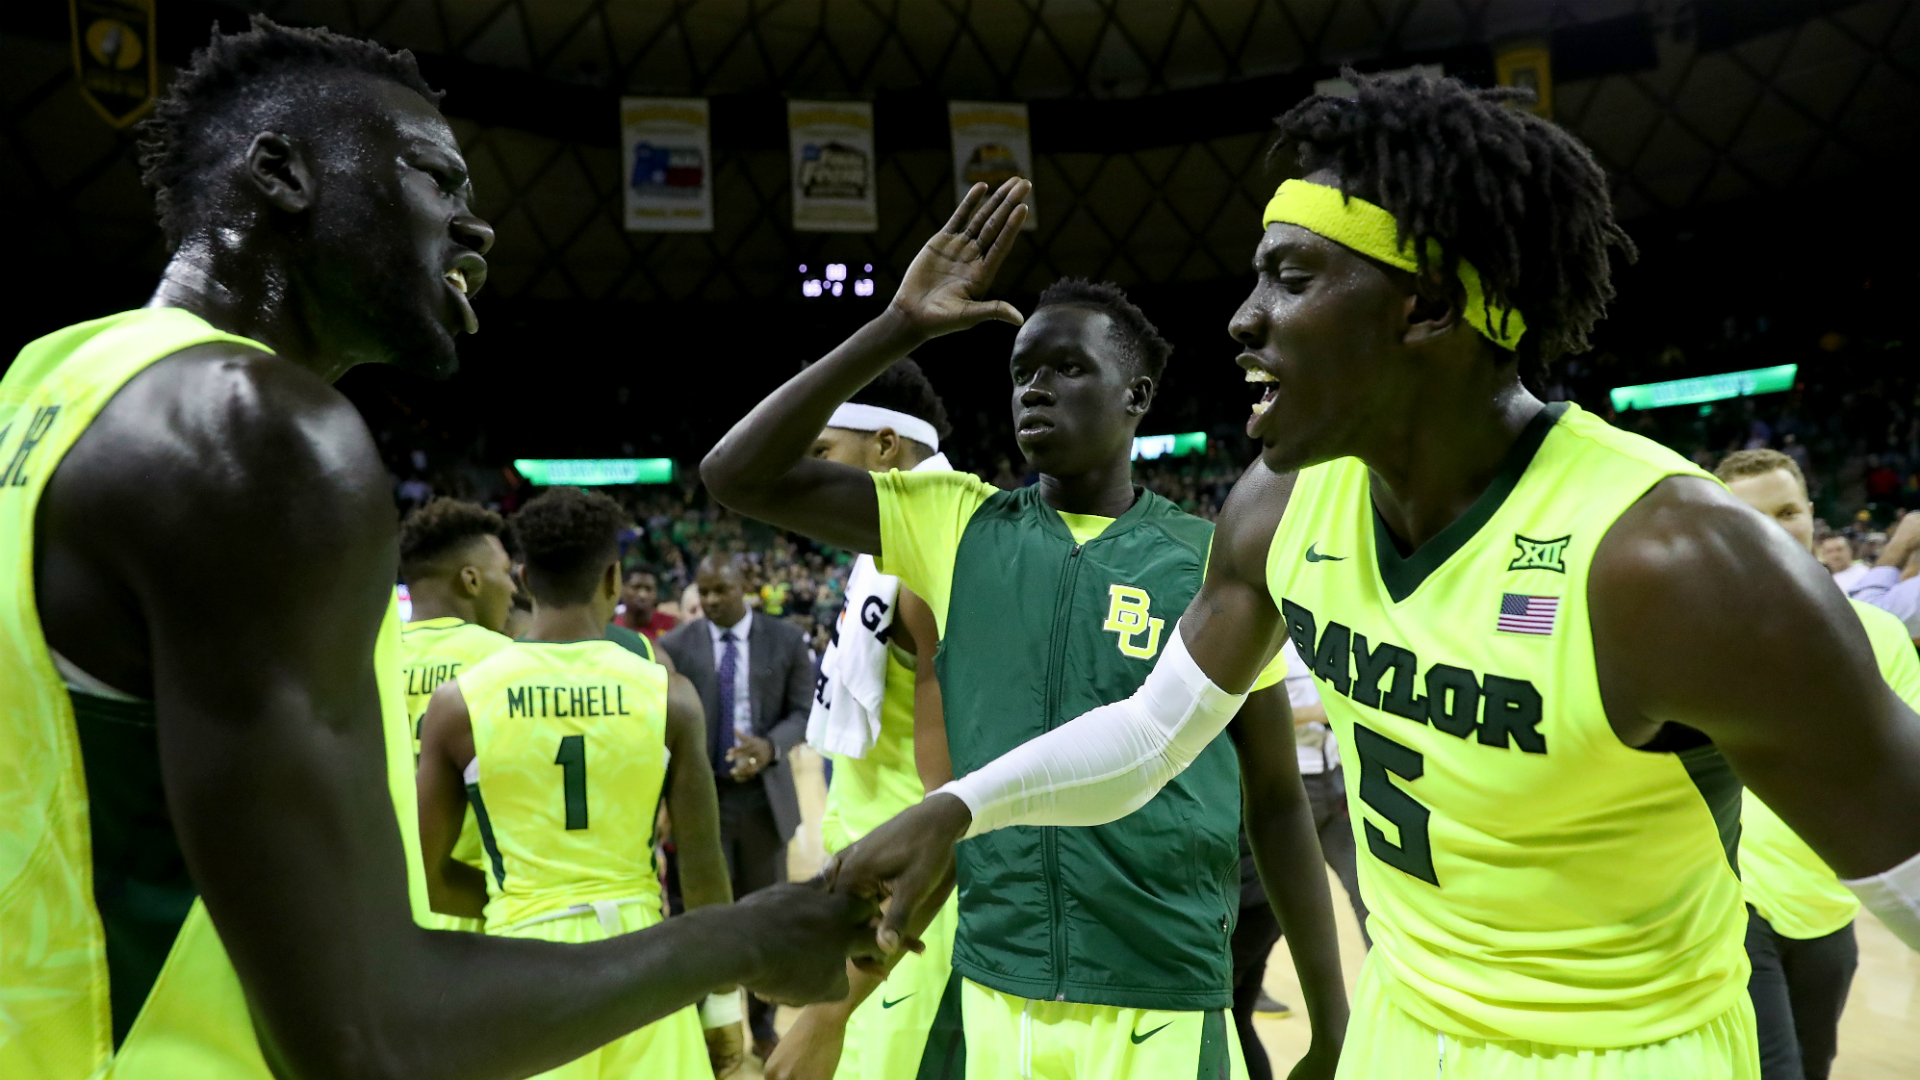 College basketball rankings: Baylor goes from dumpster fire to No. 1, but job isn't ...